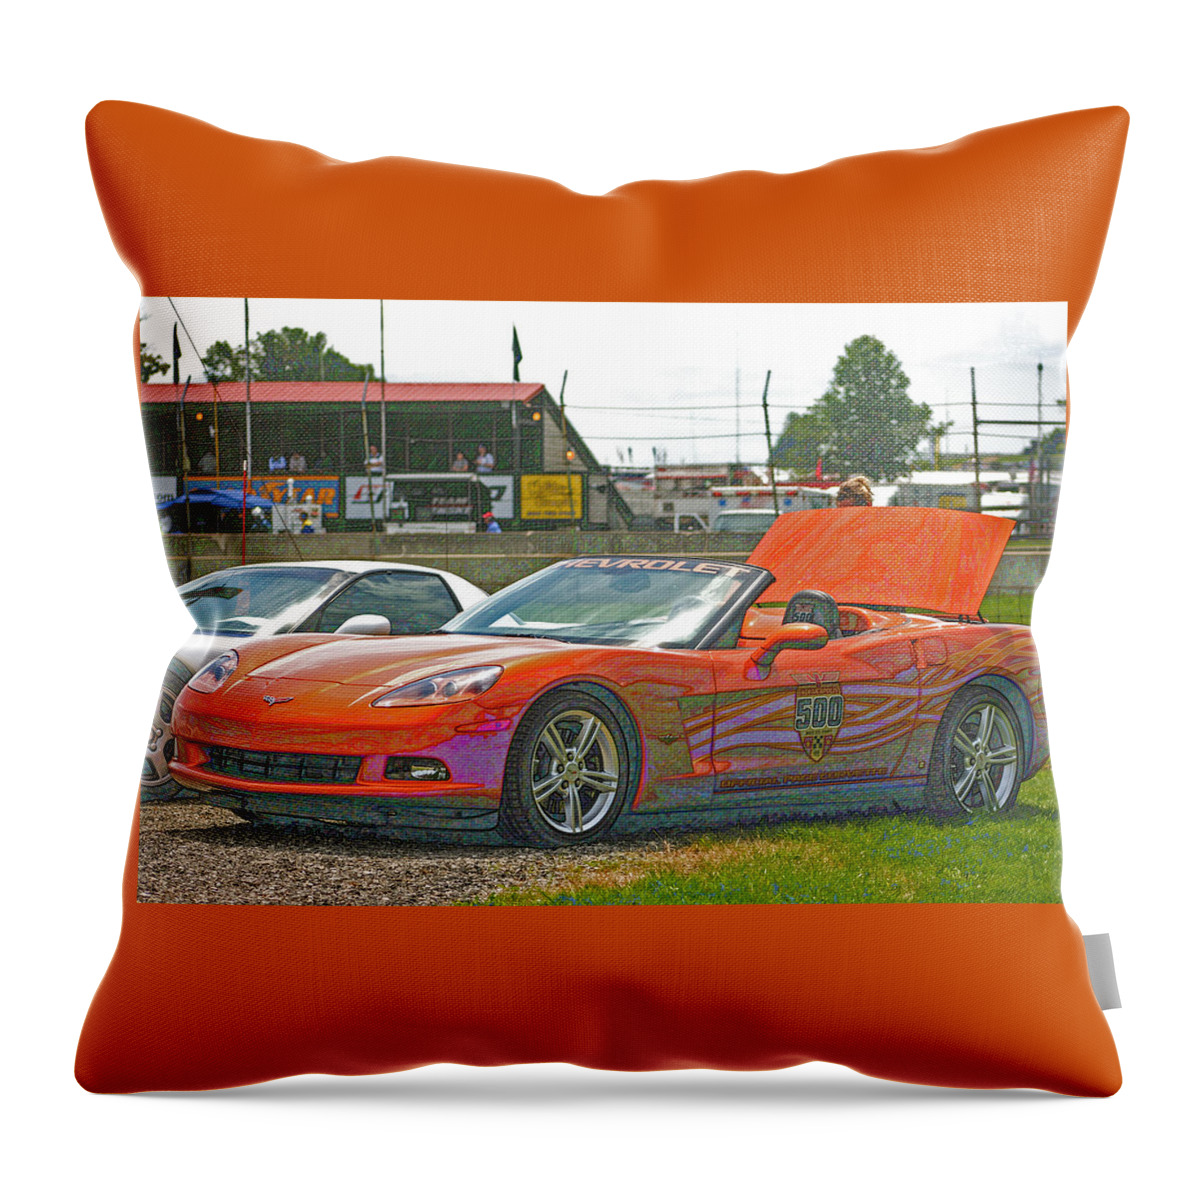 2007 Throw Pillow featuring the digital art 2007 Indianapolis Pace car by Darrell Foster